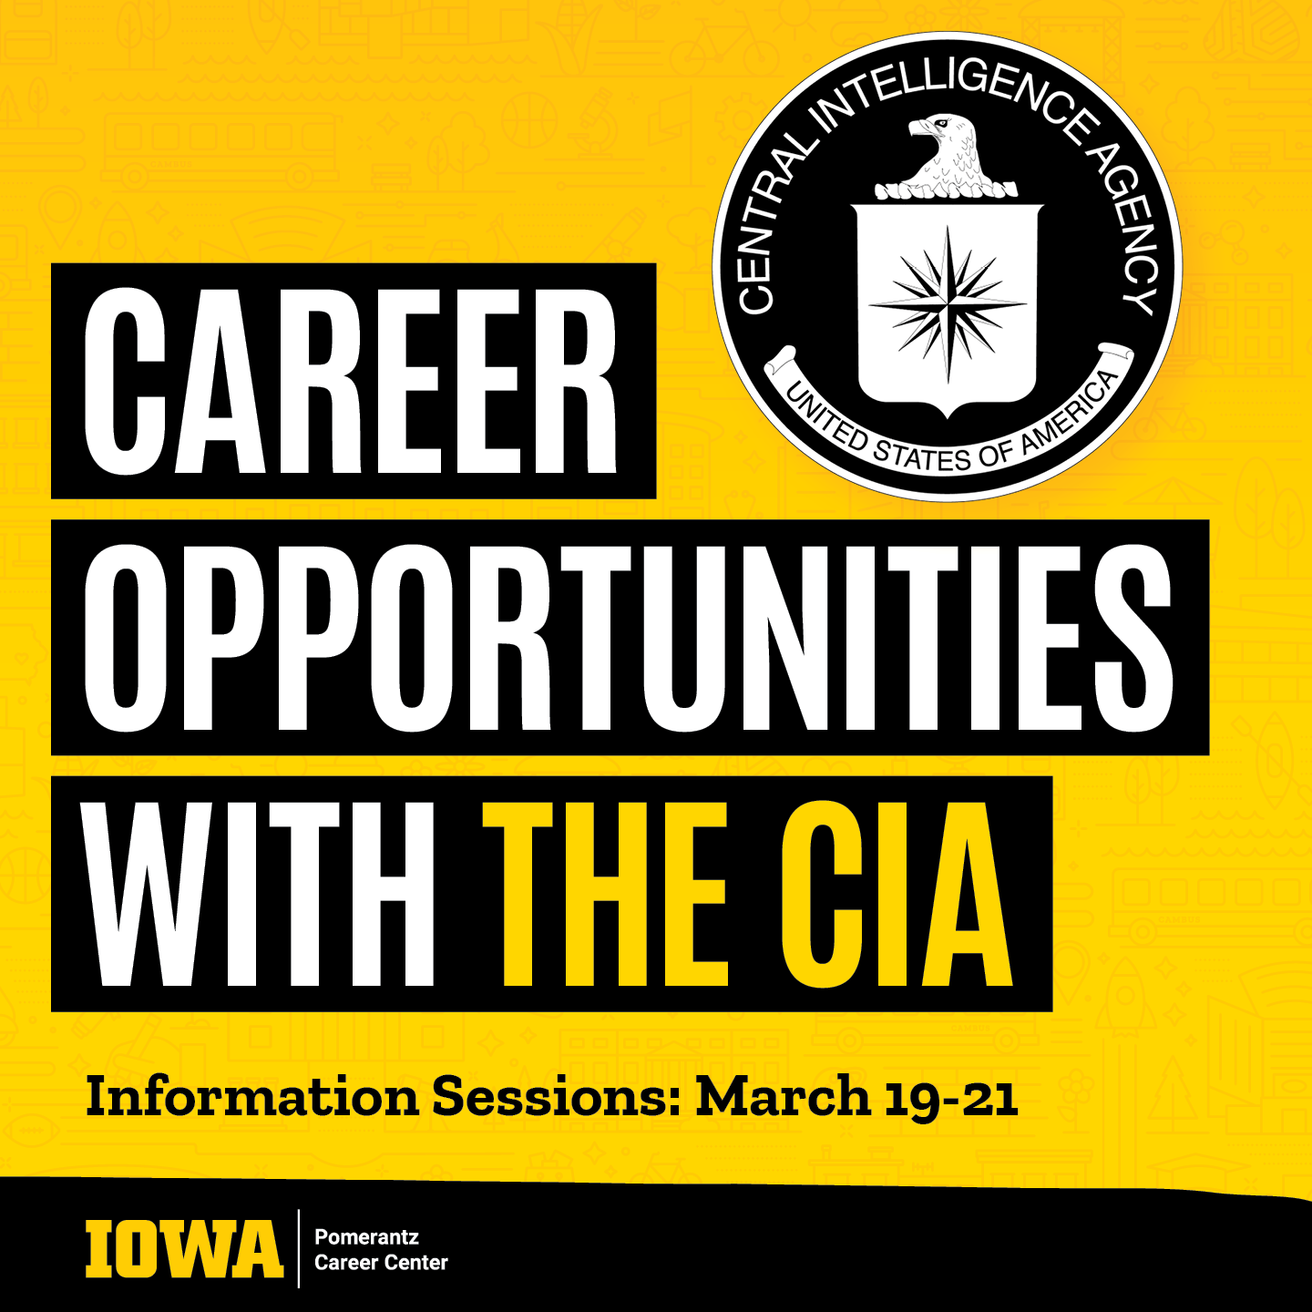 Career Opportunities with the CIA: Information Sessions March 19-21